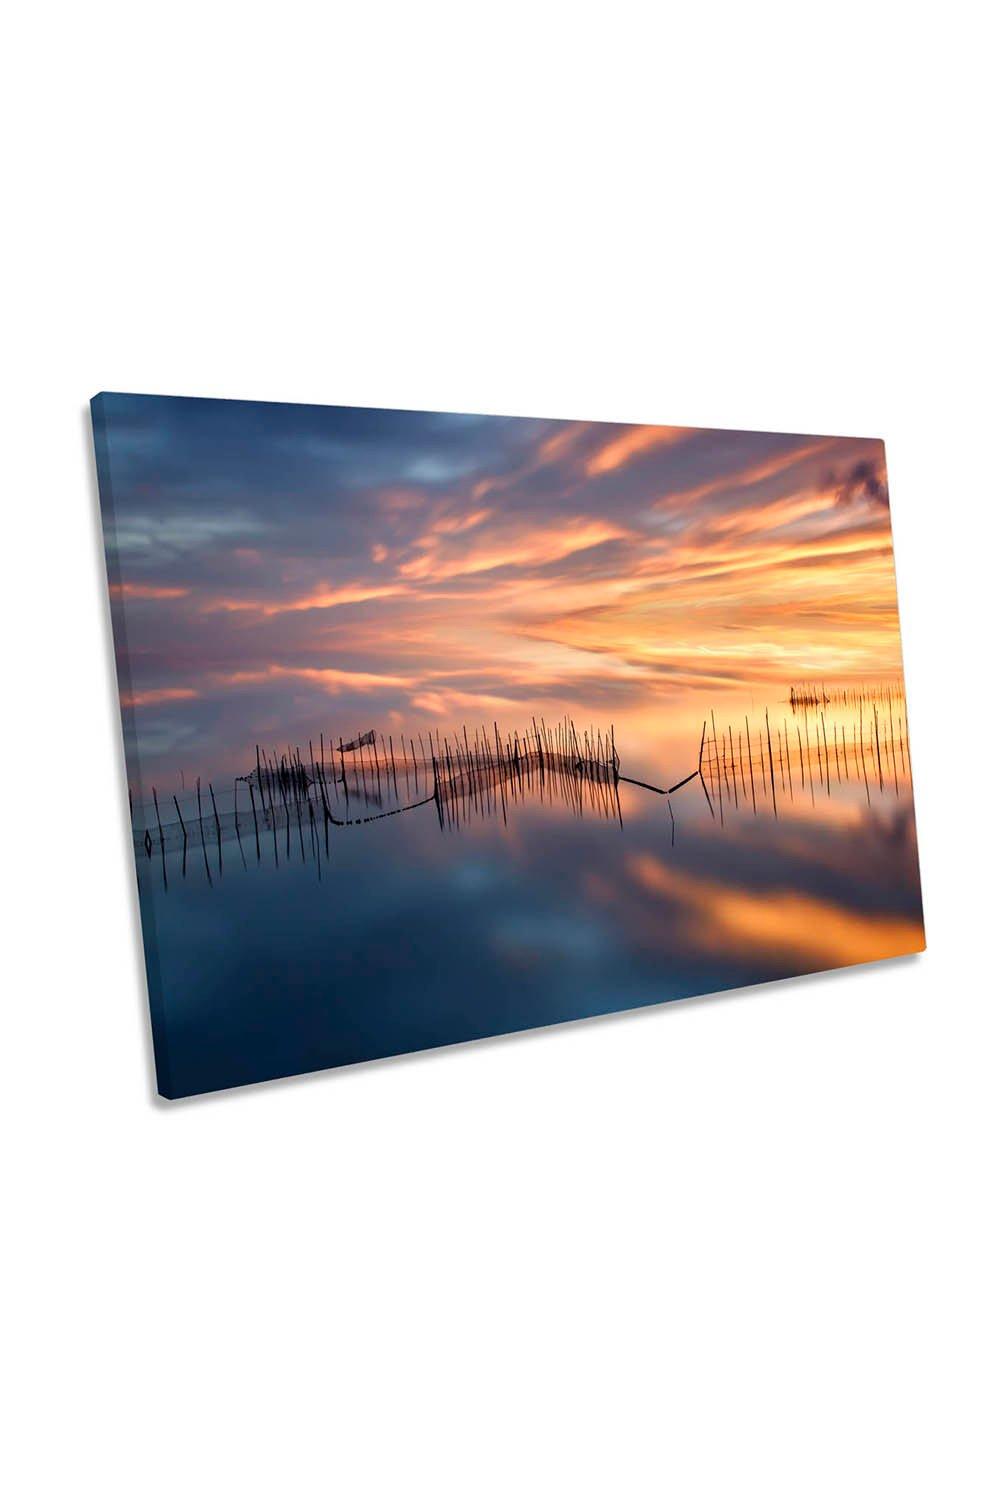 Fish Nets Sunset Calm Waters Canvas Wall Art Picture Print